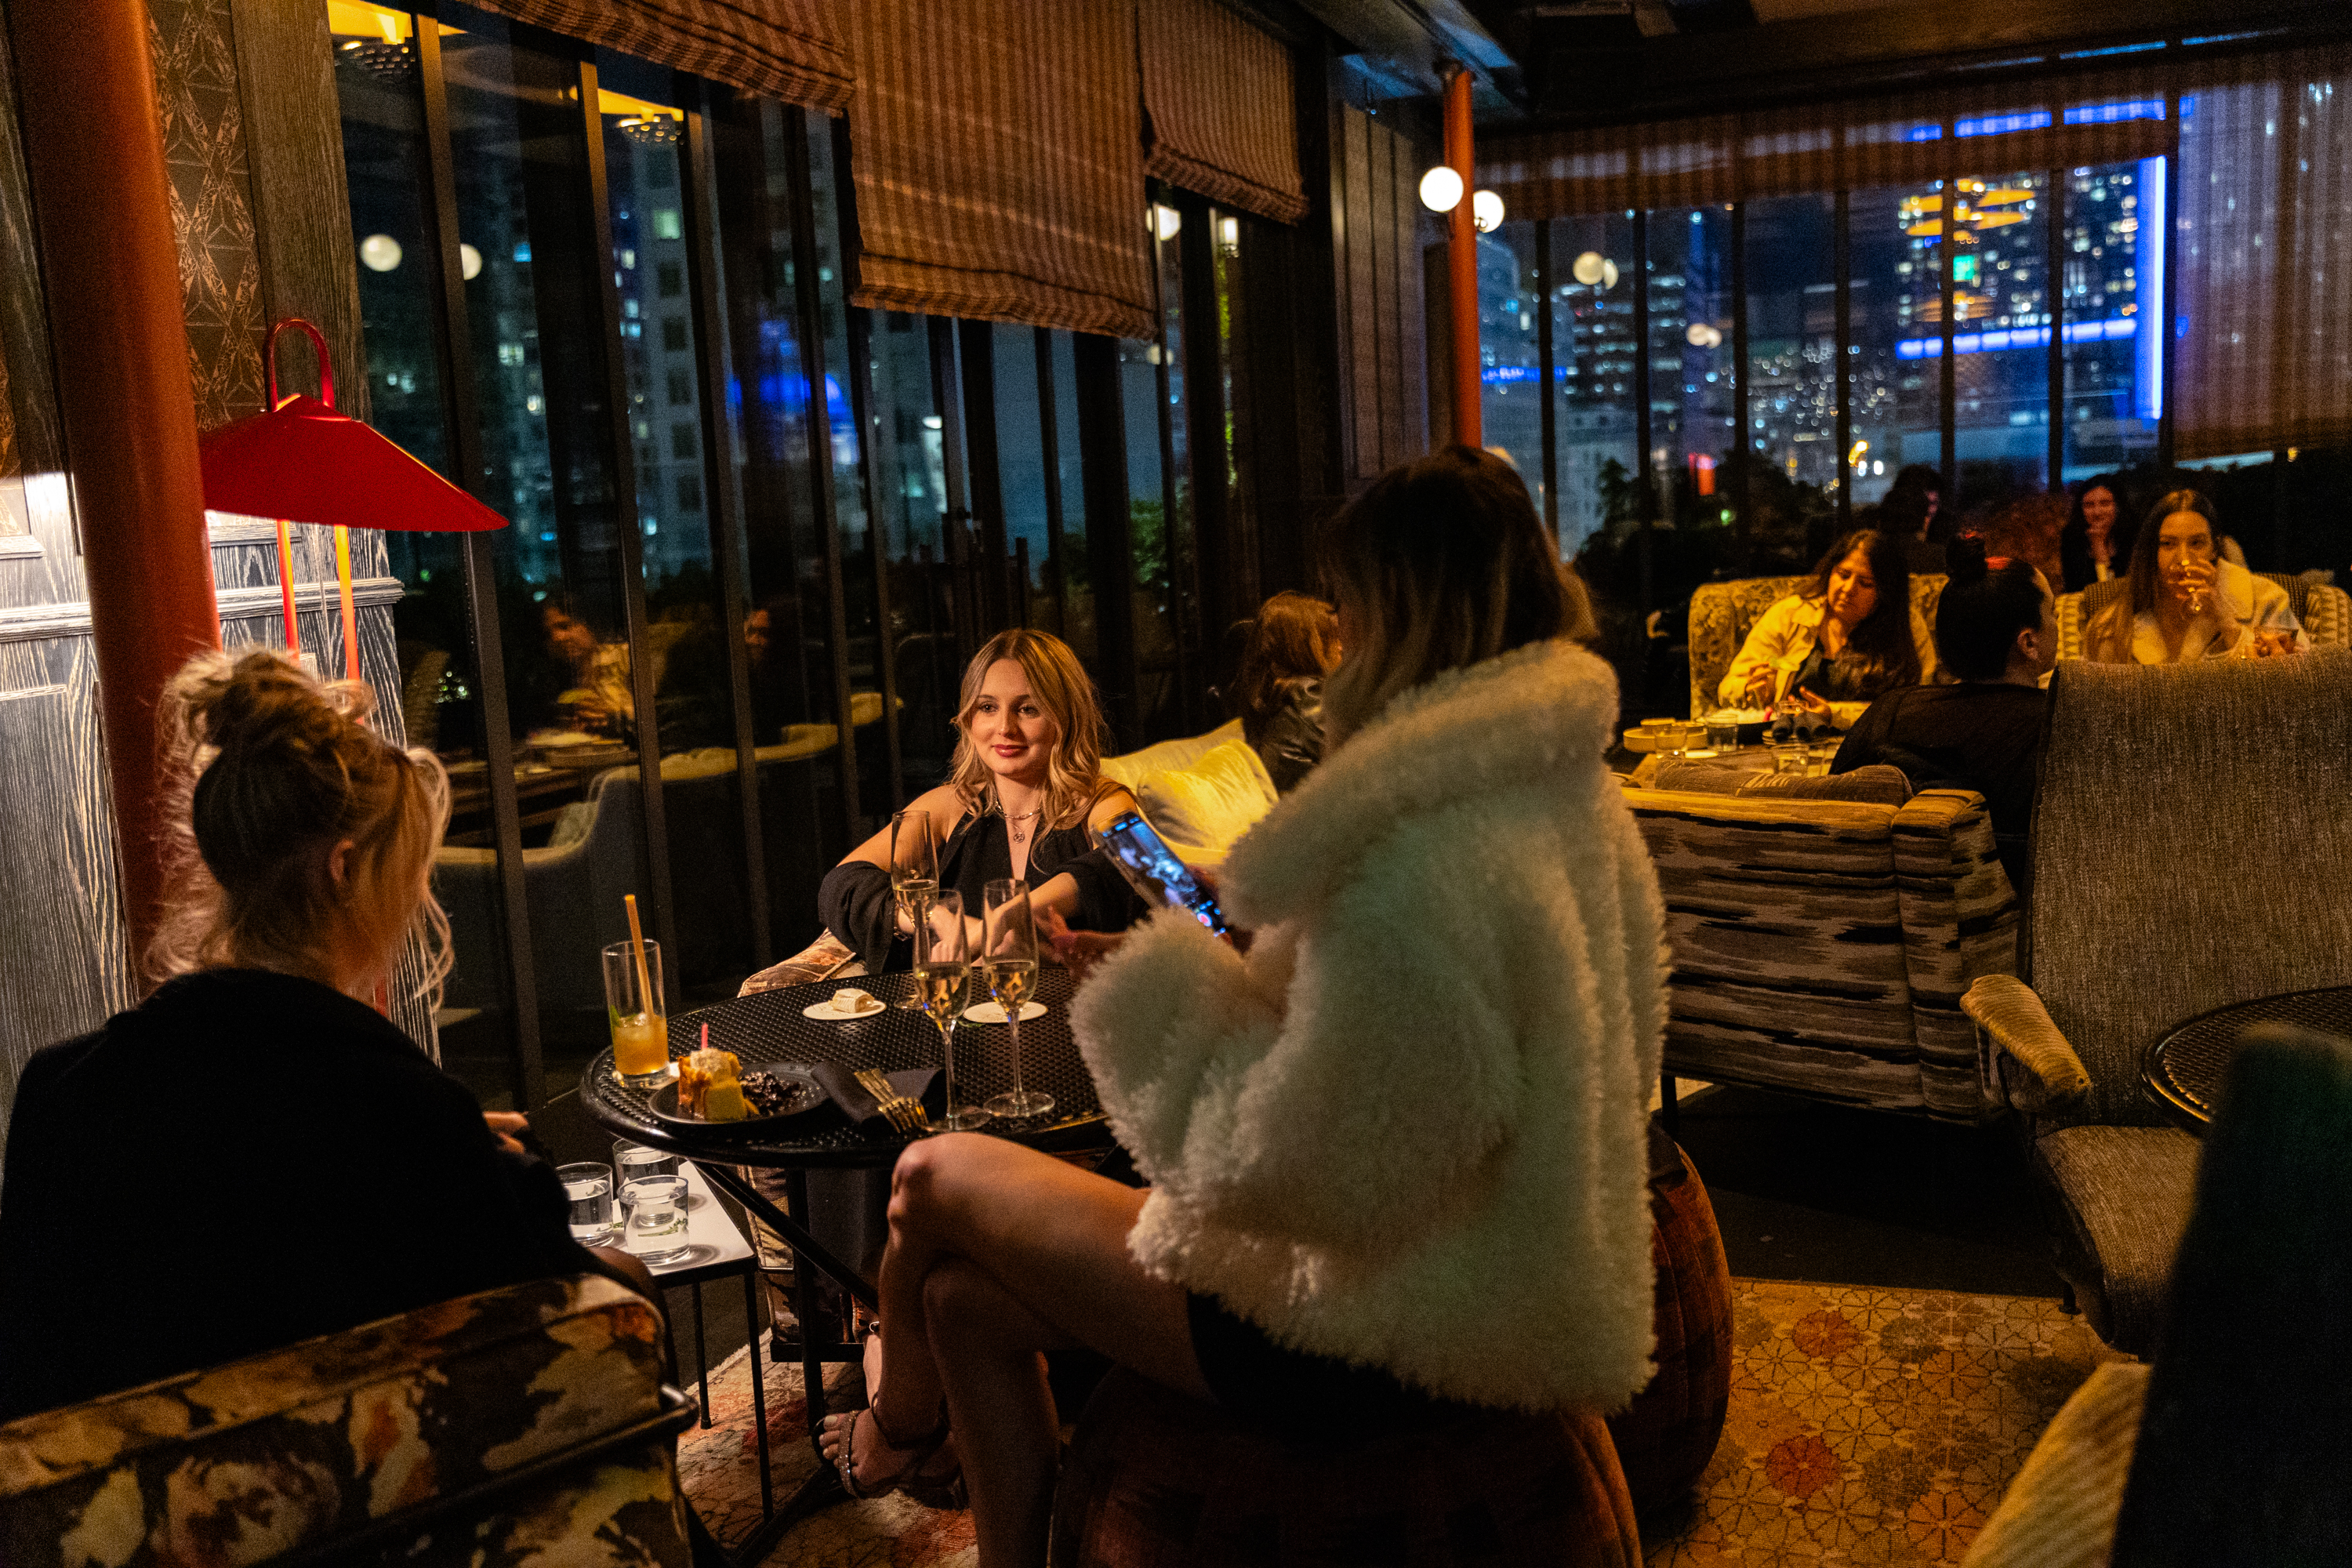 People socialize in a cozy night-time lounge with a cityscape backdrop. Drinks on tables, warm lighting, and a relaxed ambiance.